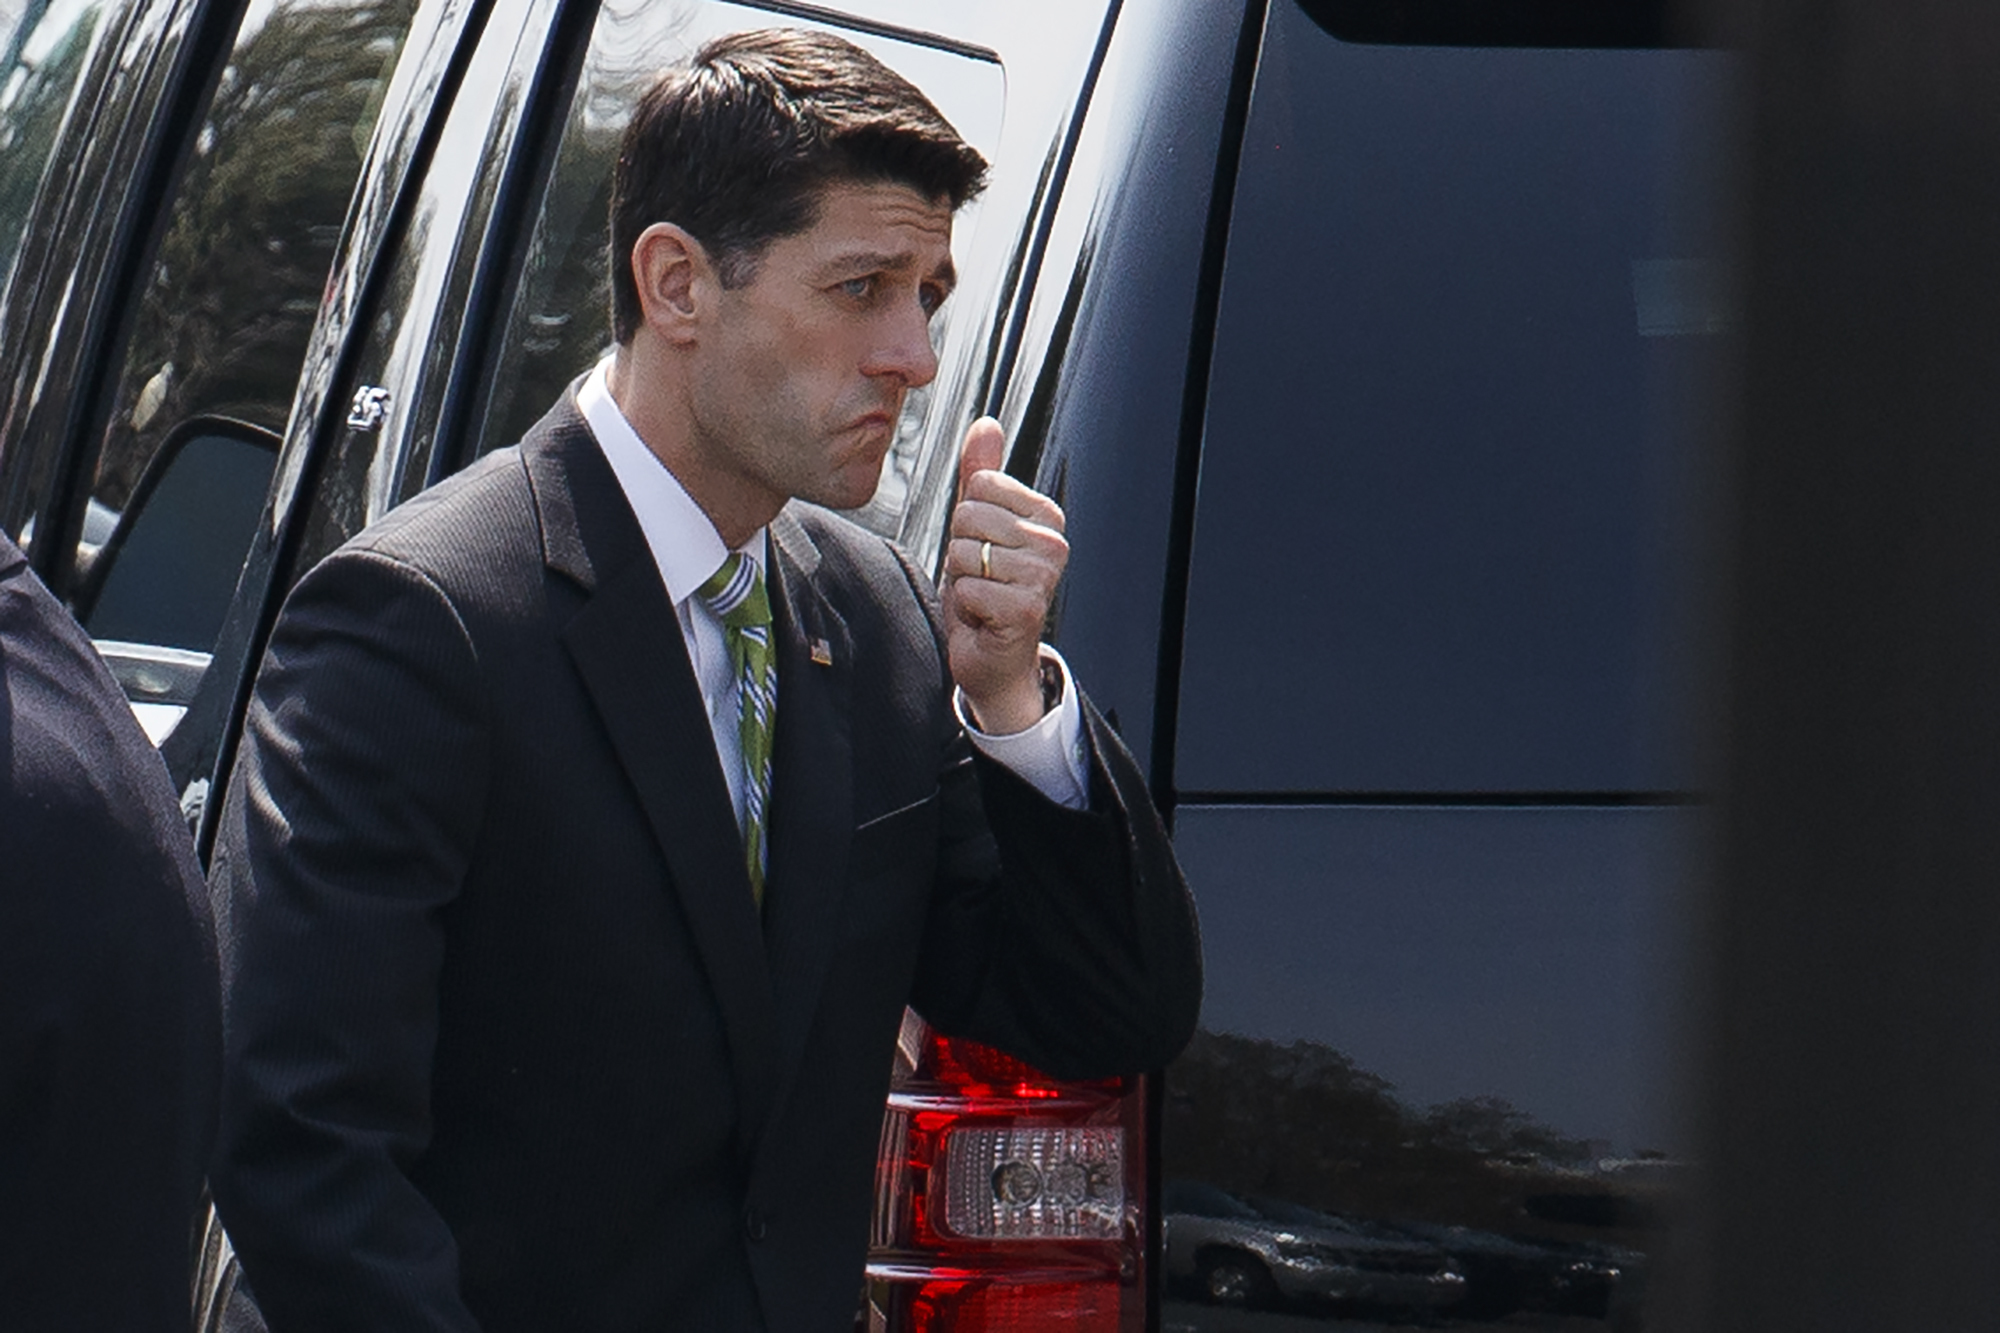 PHOTO: House Speaker Paul Ryan leaves the White House after meeting with President Donald Trump, Friday, March 24, 2017.